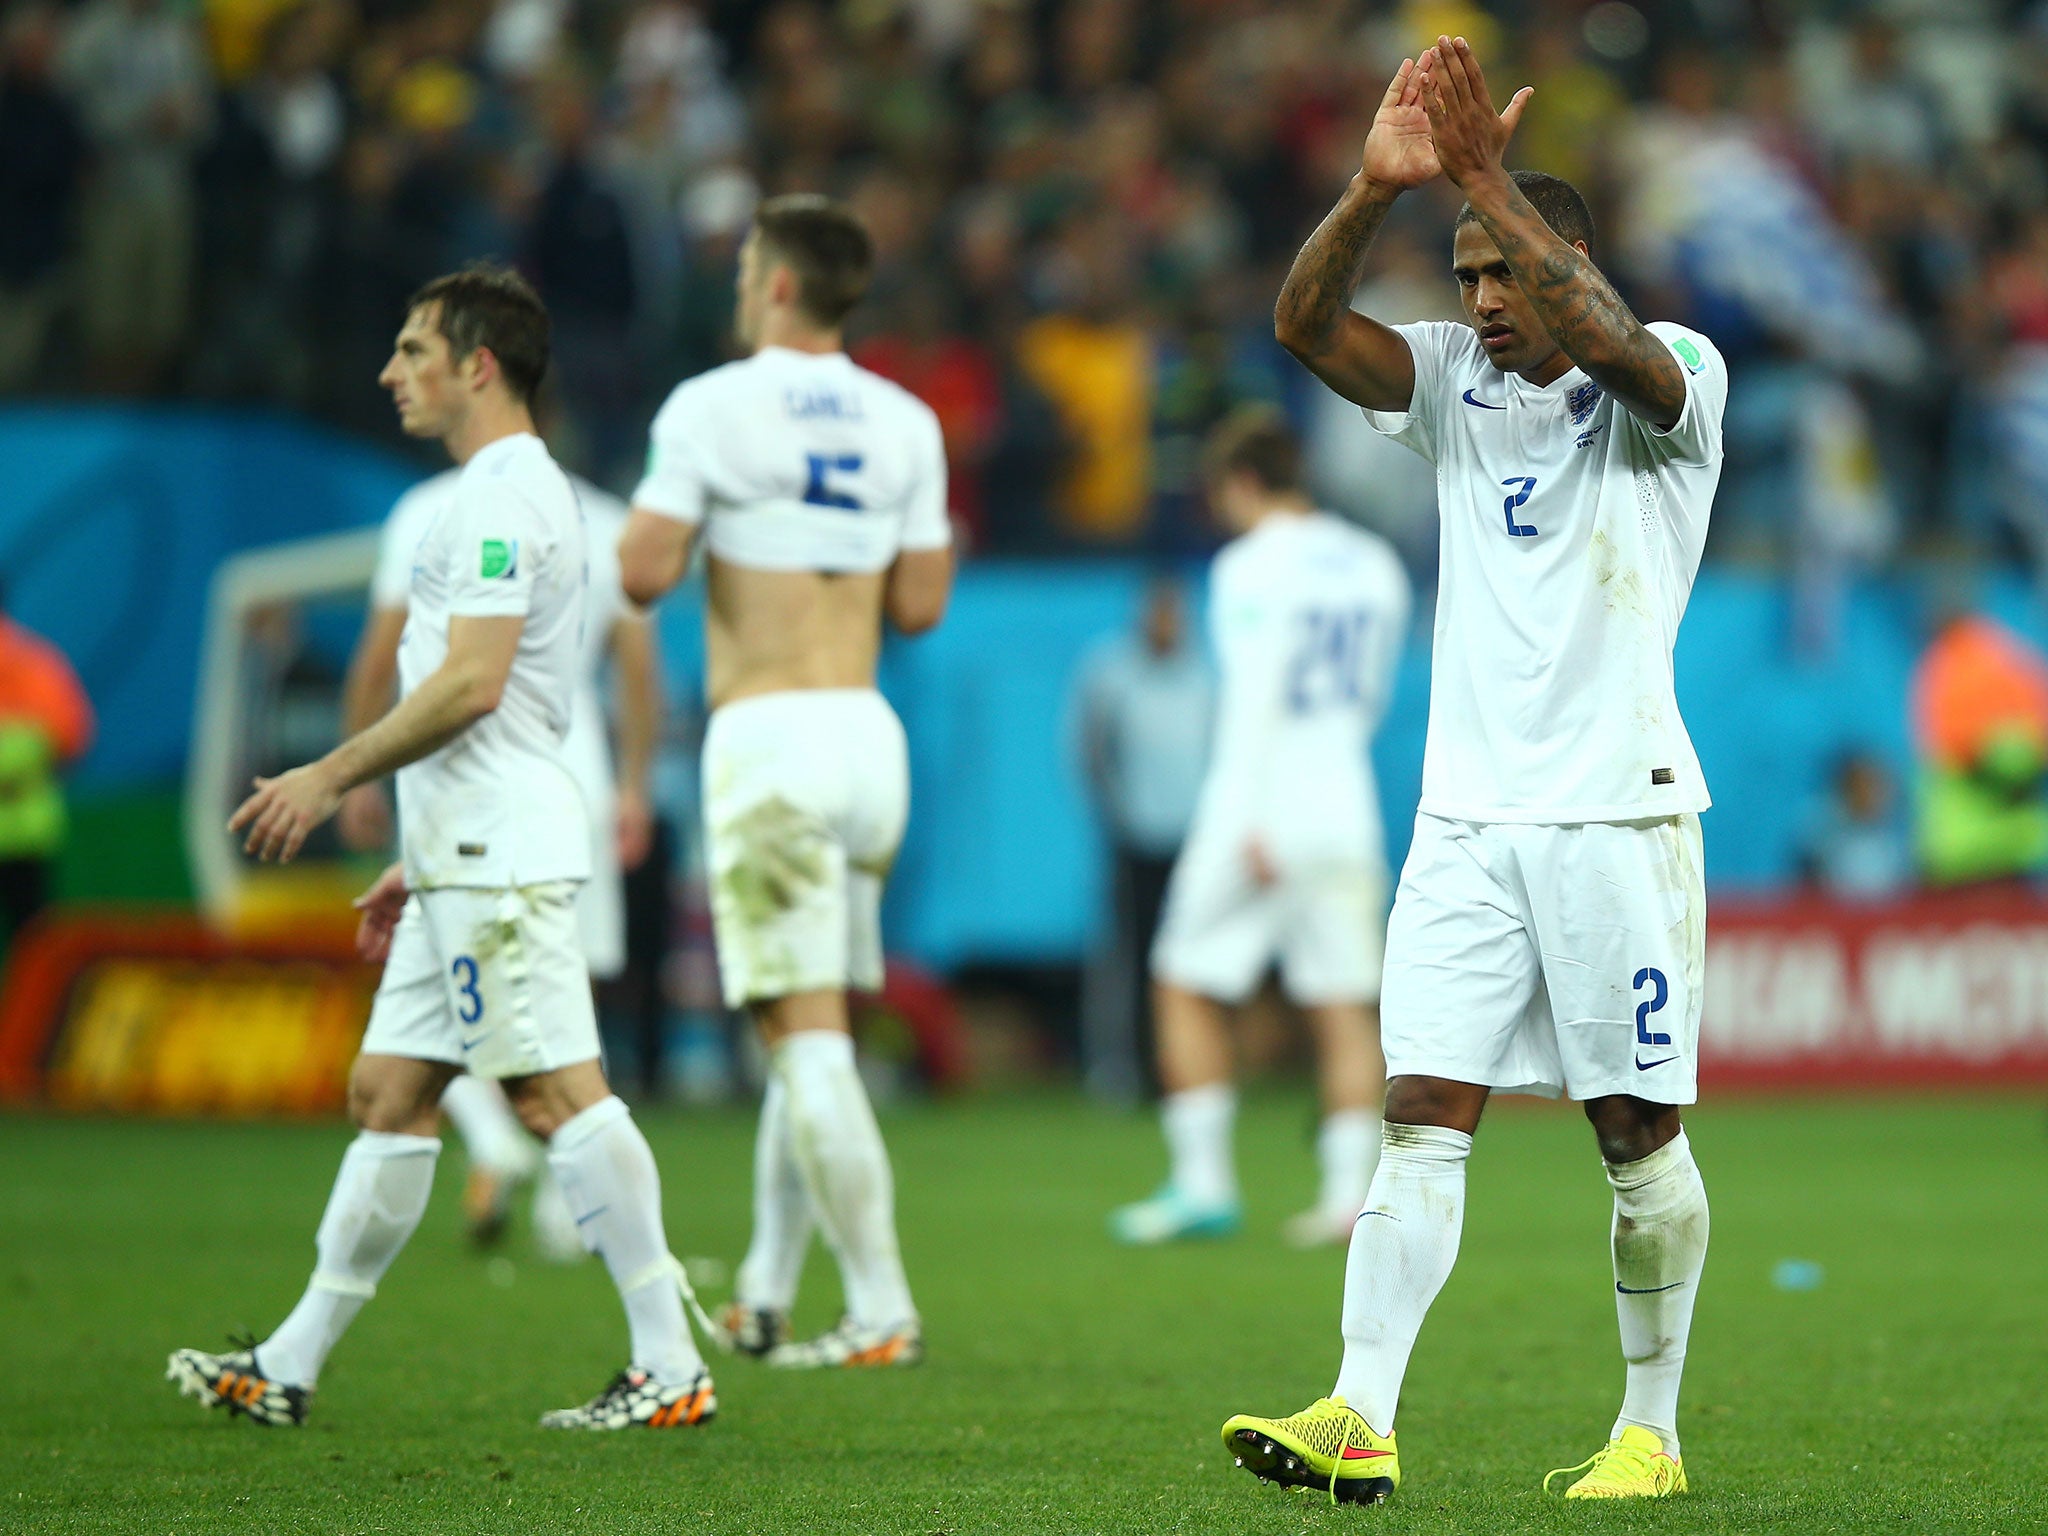 Glen Johnson playing for England at the 2014 World Cup